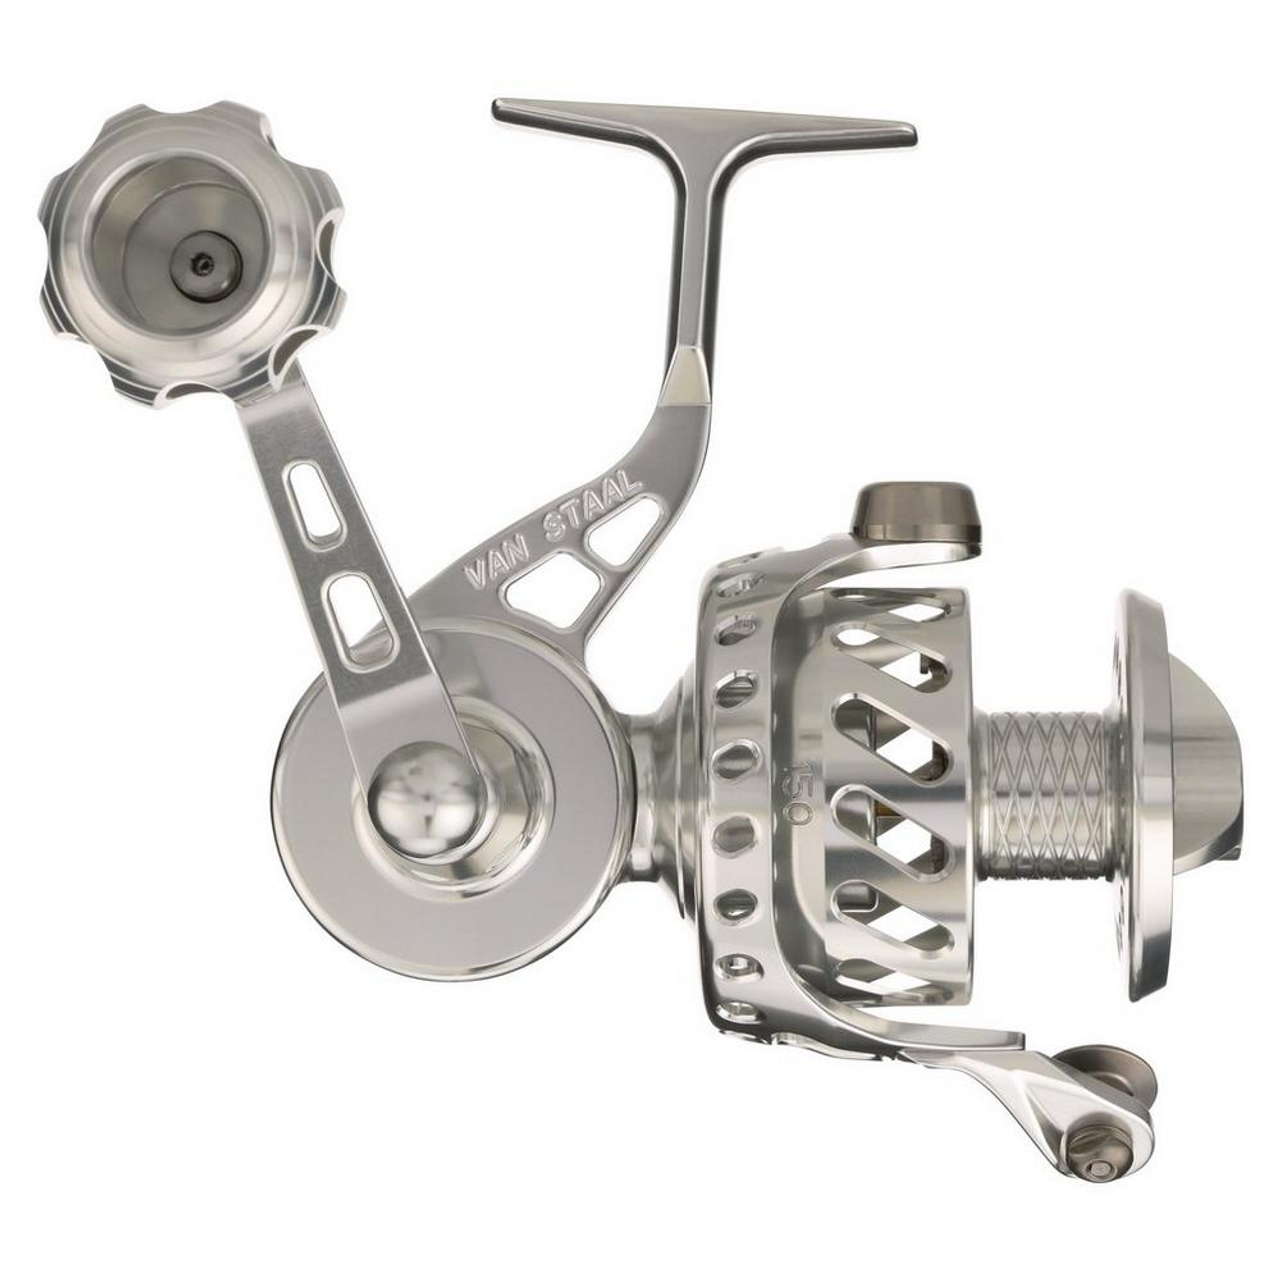 Van Staal VSX2 Bailed Spinning Reels Melton Tackle, 56% OFF